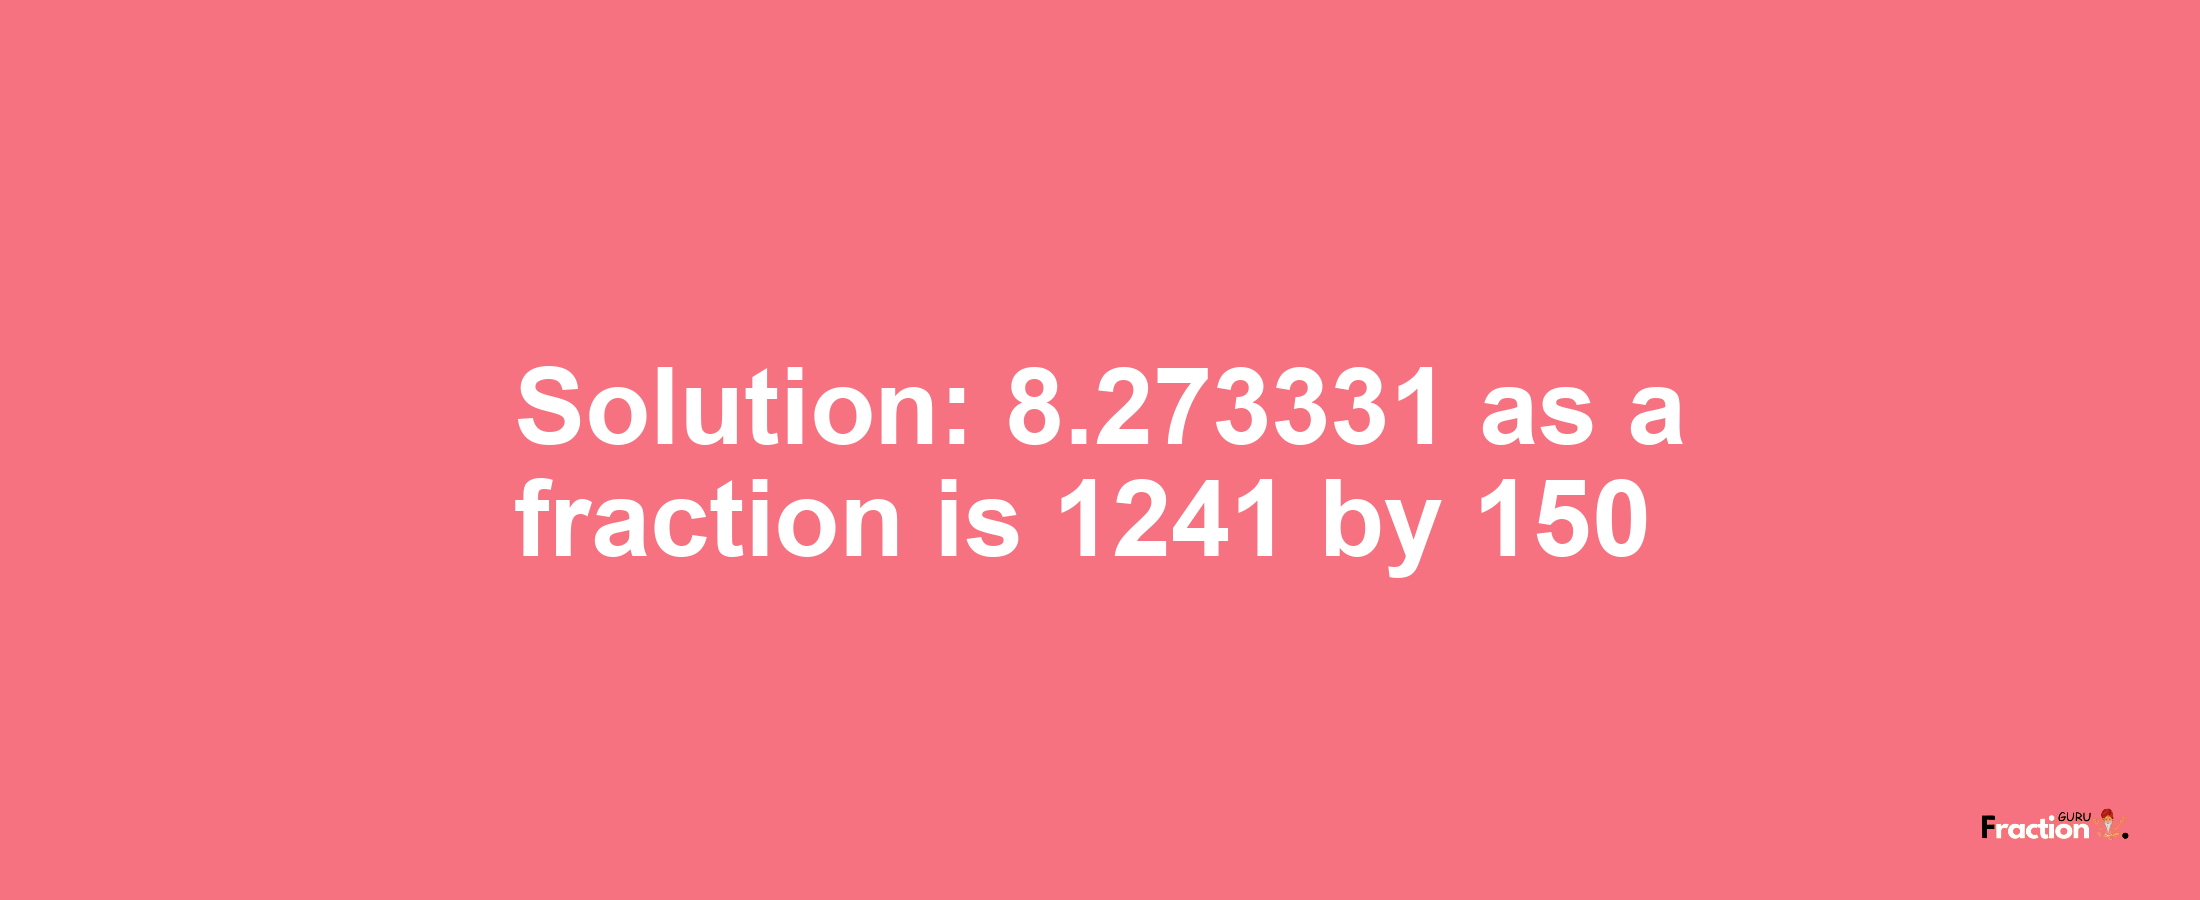 Solution:8.273331 as a fraction is 1241/150